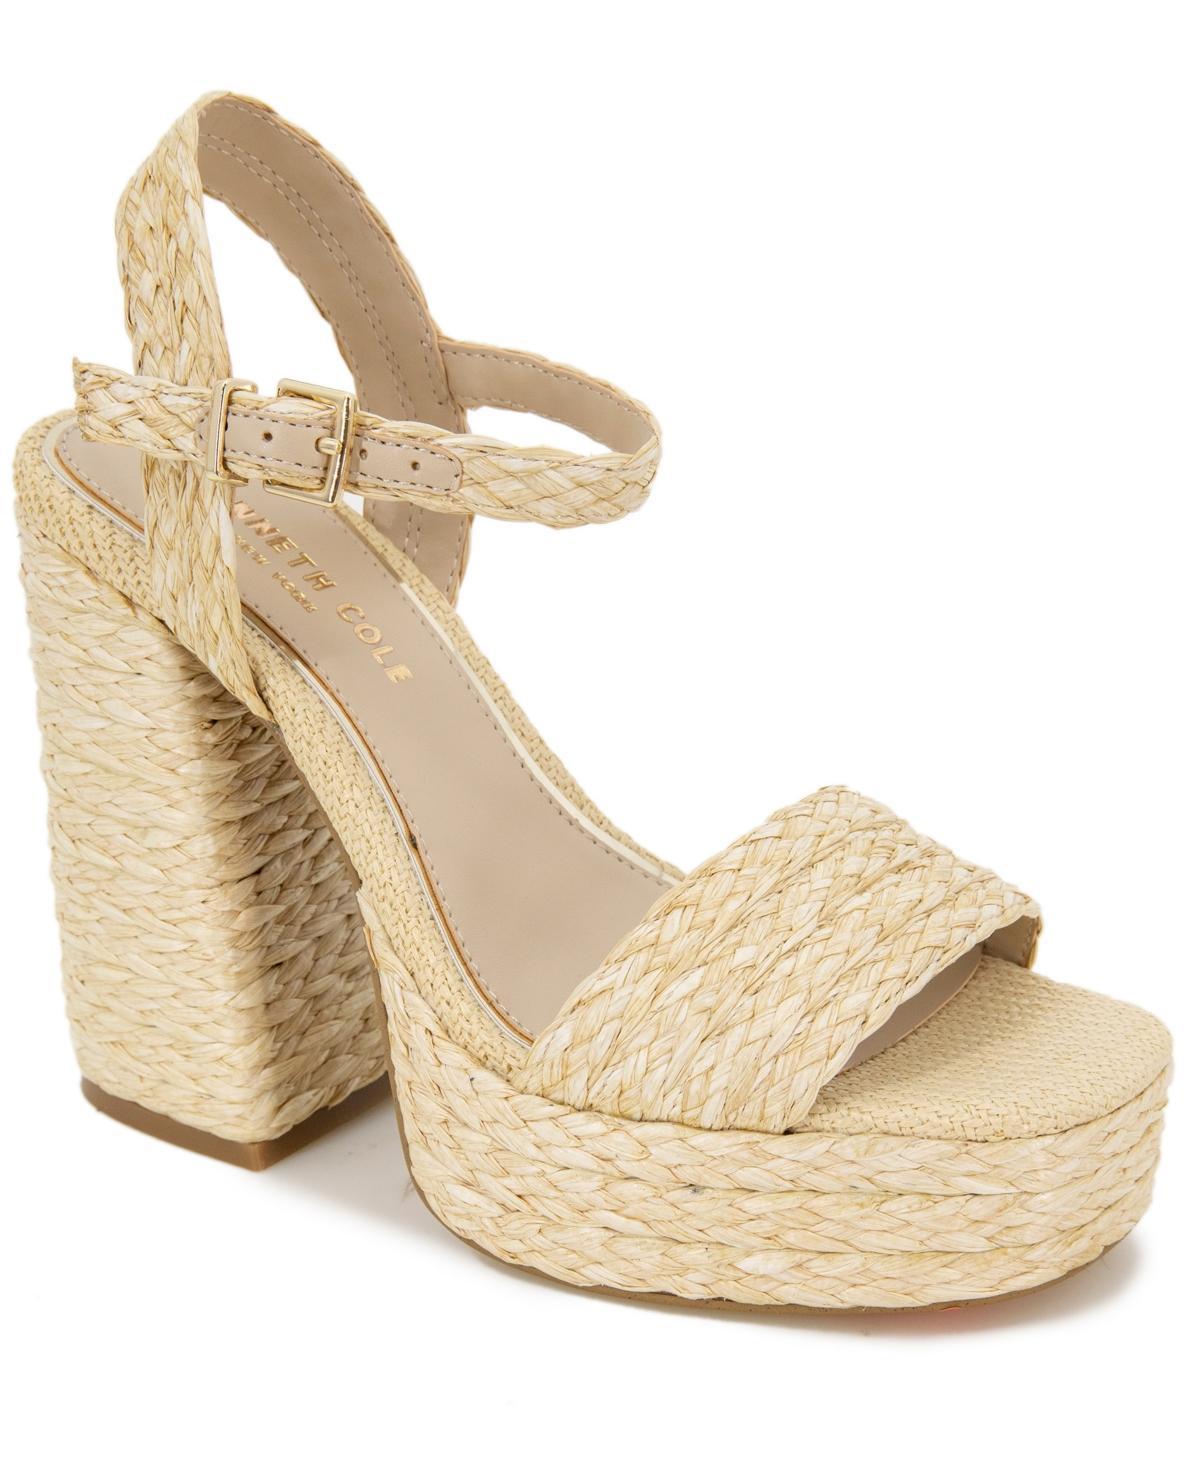 Kenneth Cole New York Womens Dolly Platform Sandals Womens Shoes Product Image